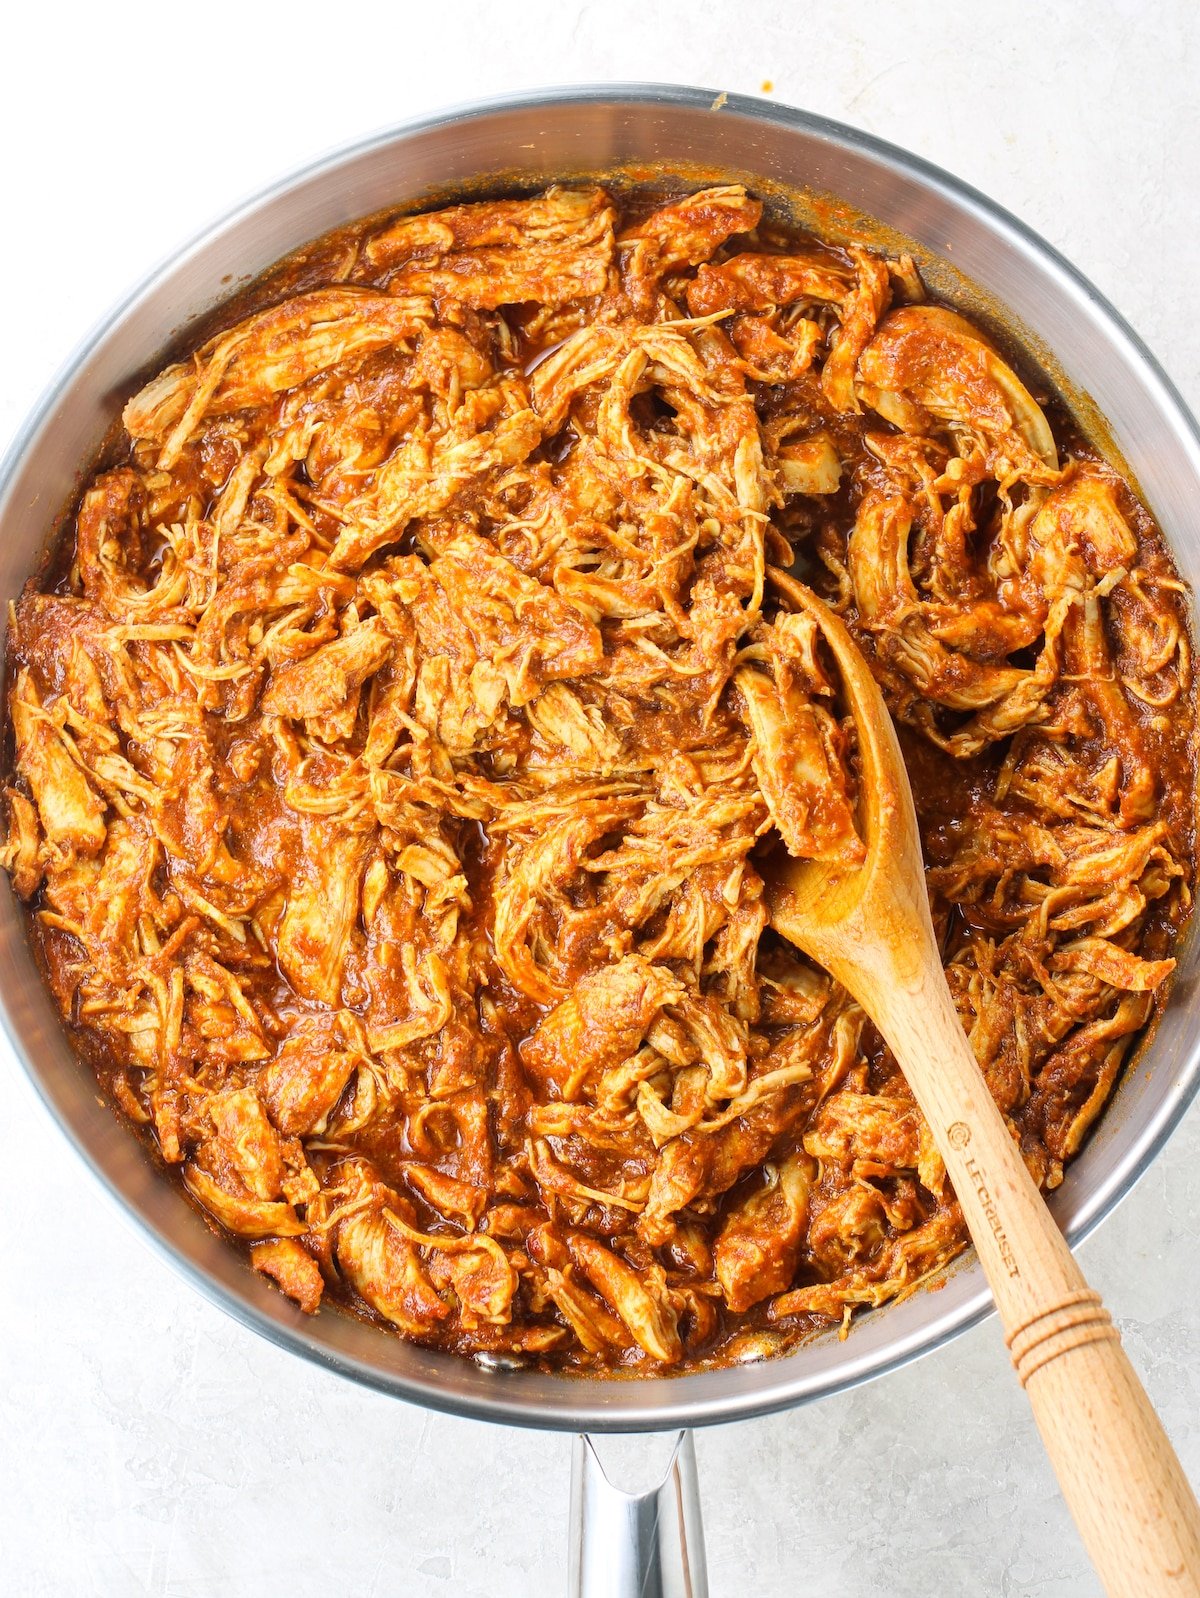 A pan with cooked shredded chicken breasts tossed in a zesty sauce.